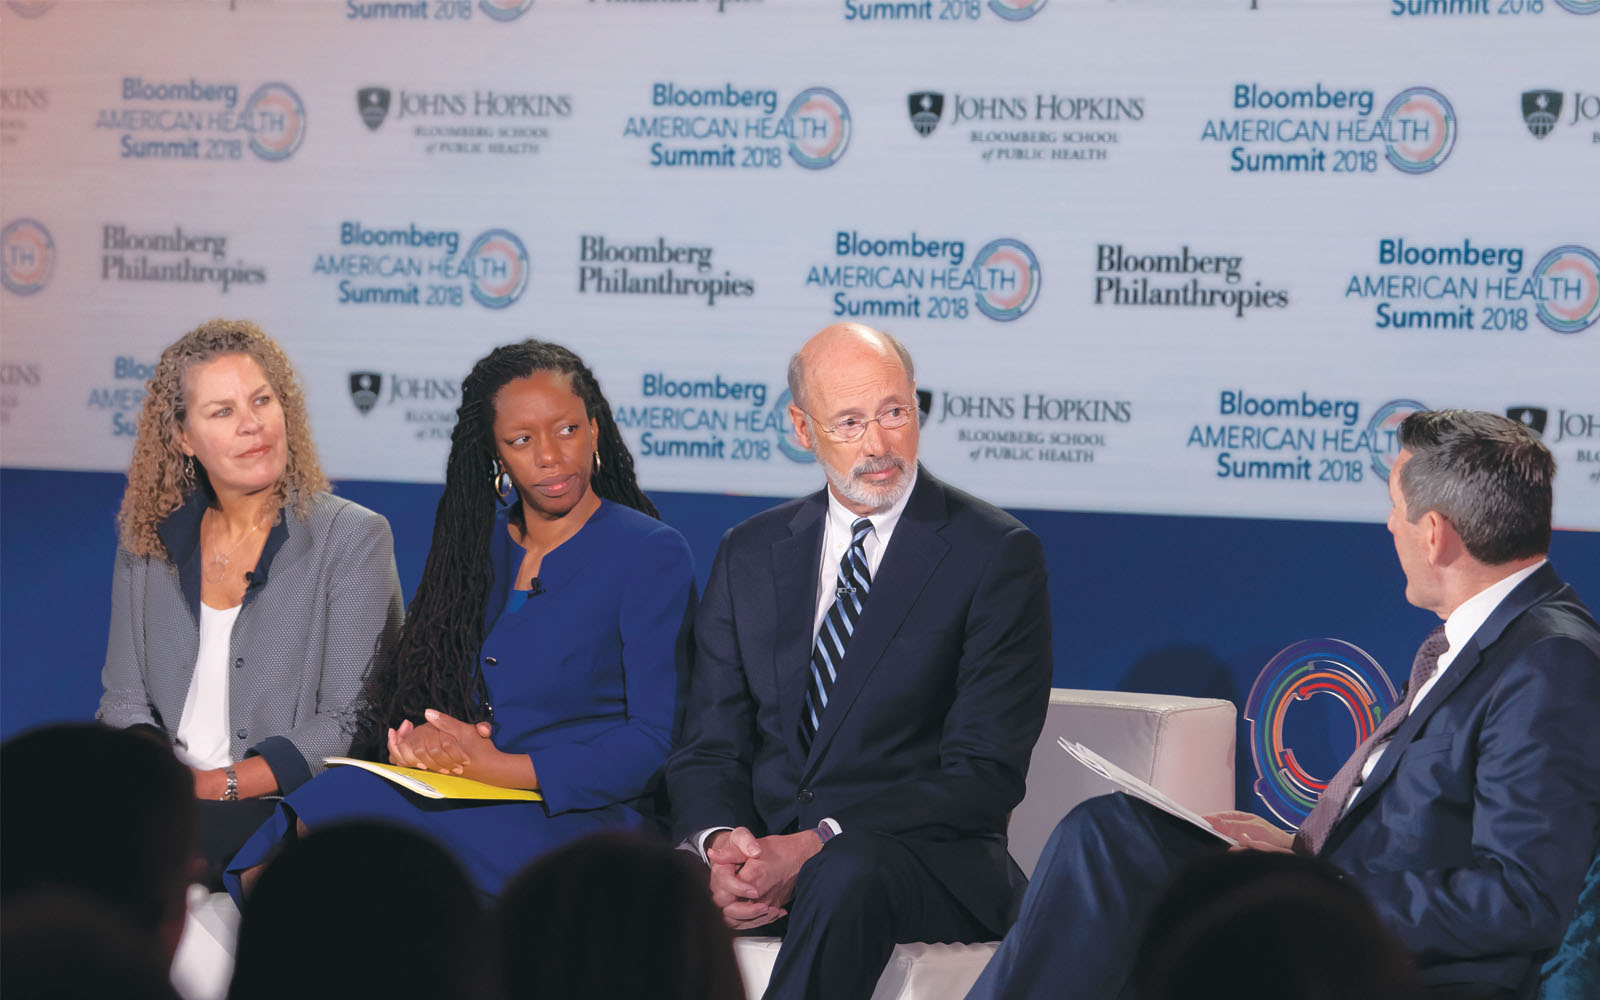 panel discussion on opioid addiction with Pennsylvania Governor Tom Wolf